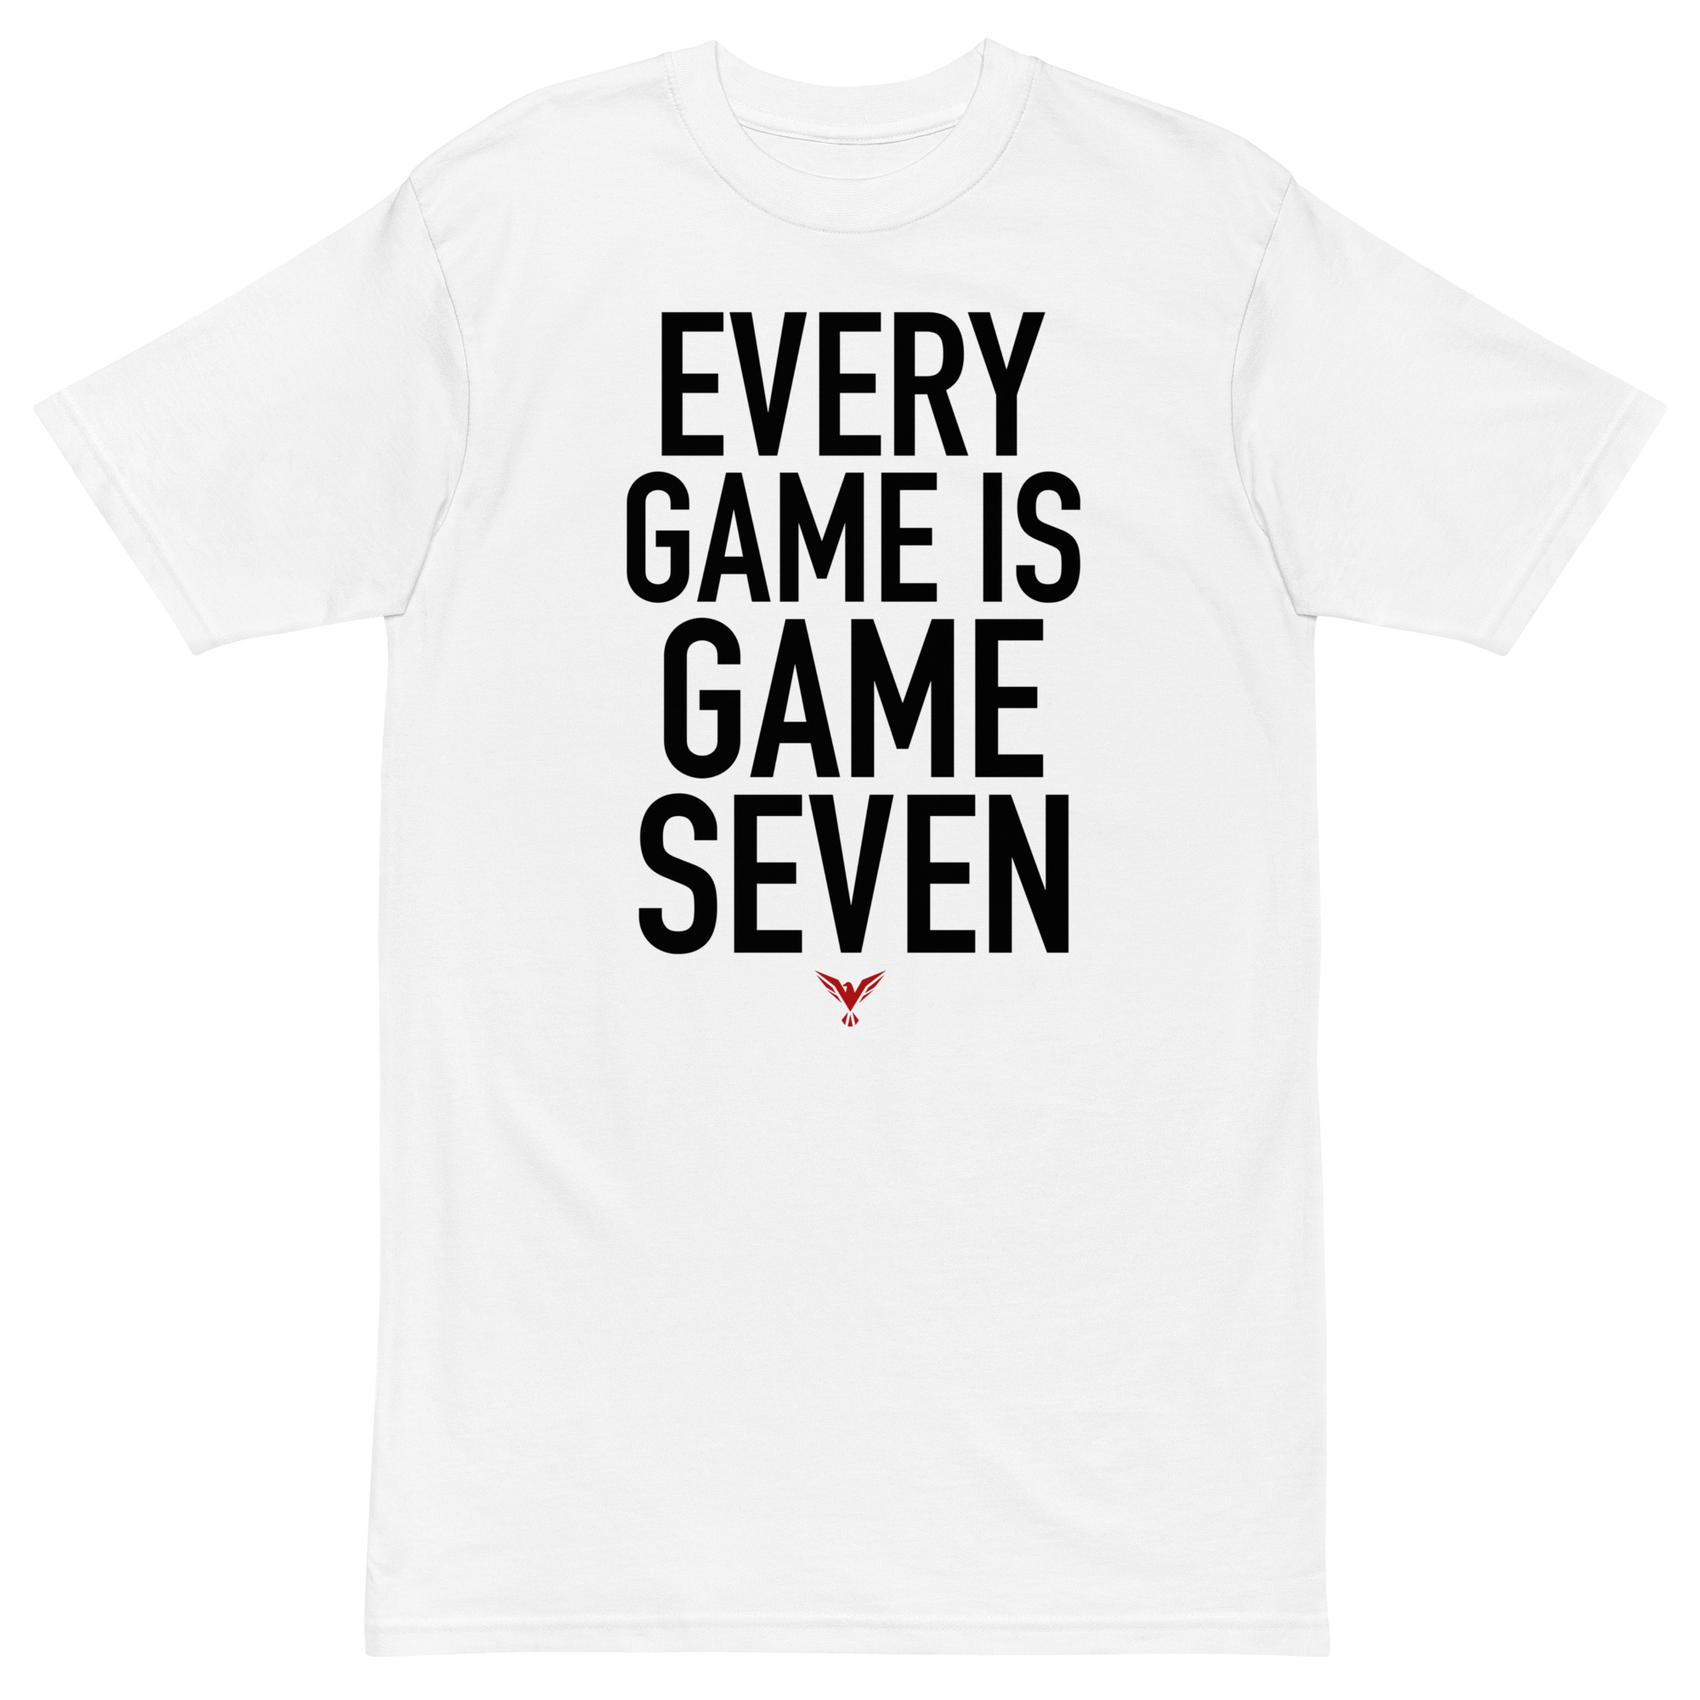 Every Game Is Game Seven Tee
Our Every Game Is Game Seven Tee is crafted from premium 100% Cotton for unbeatable comfort and durability. Show your support for Win. Perfect for the gym, the gameT-ShirtWin.Game